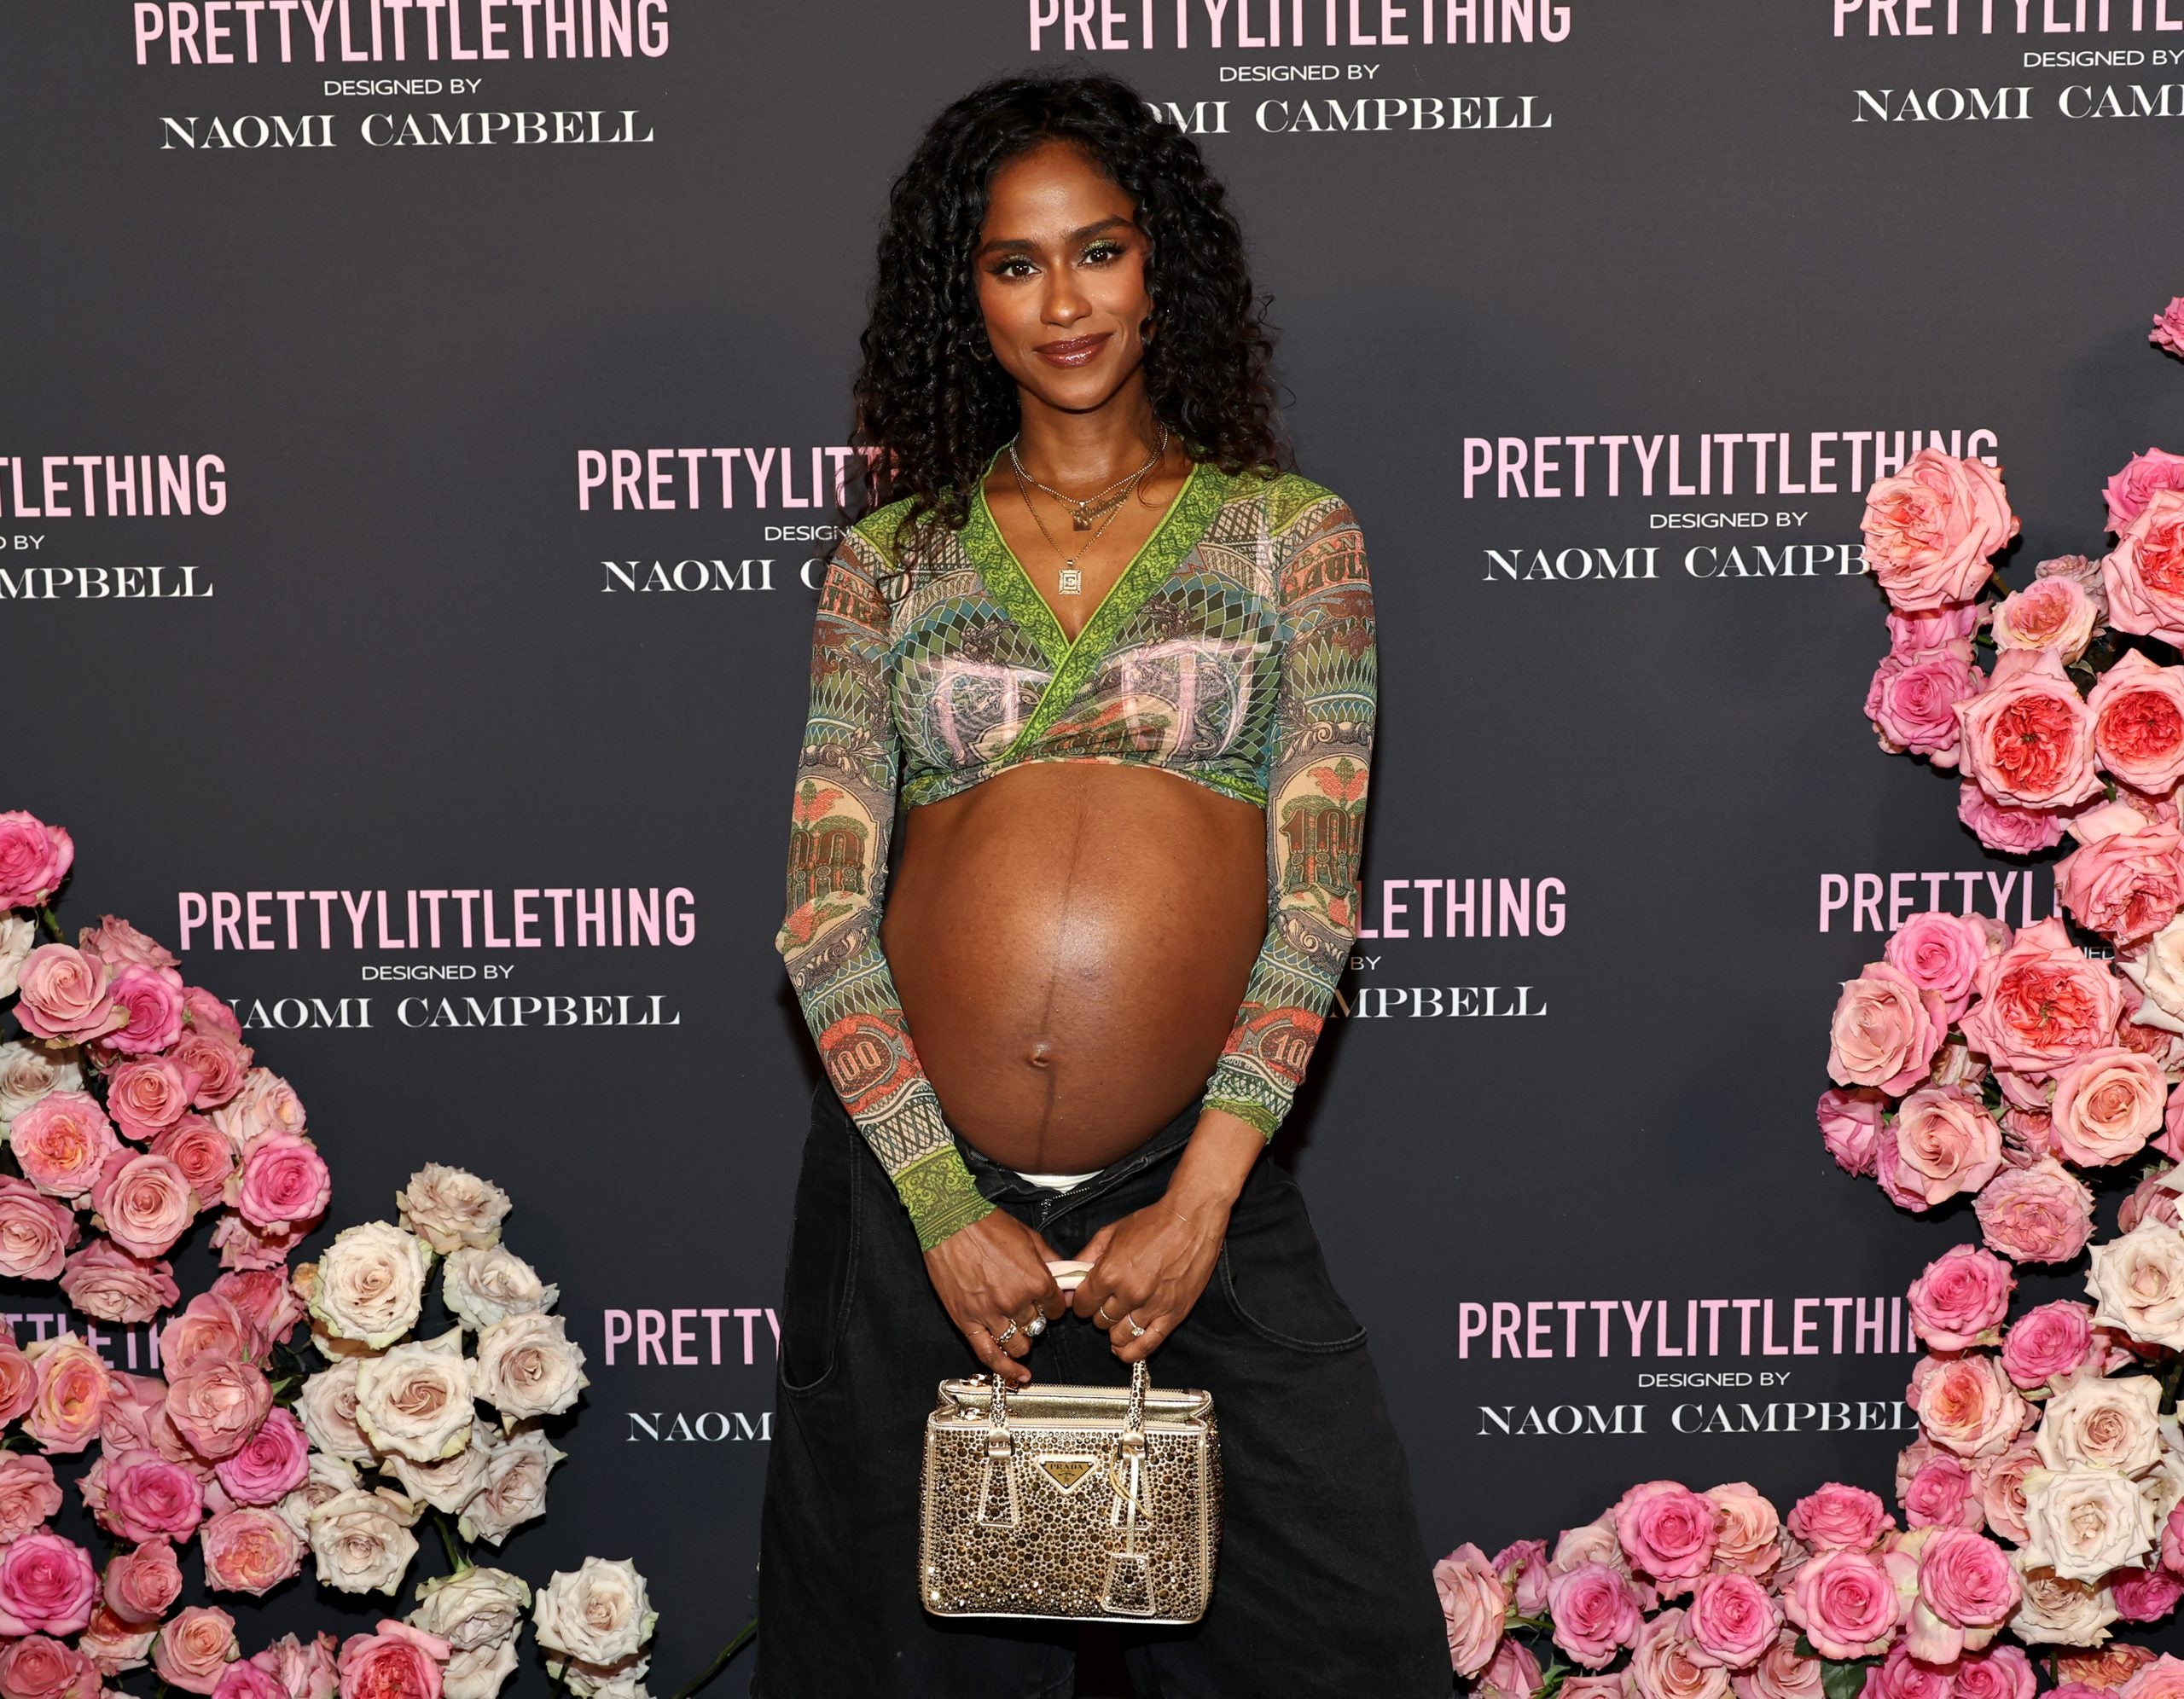 Bump Watch All The Black Celebrity Women Pregnant In 2023 Essence